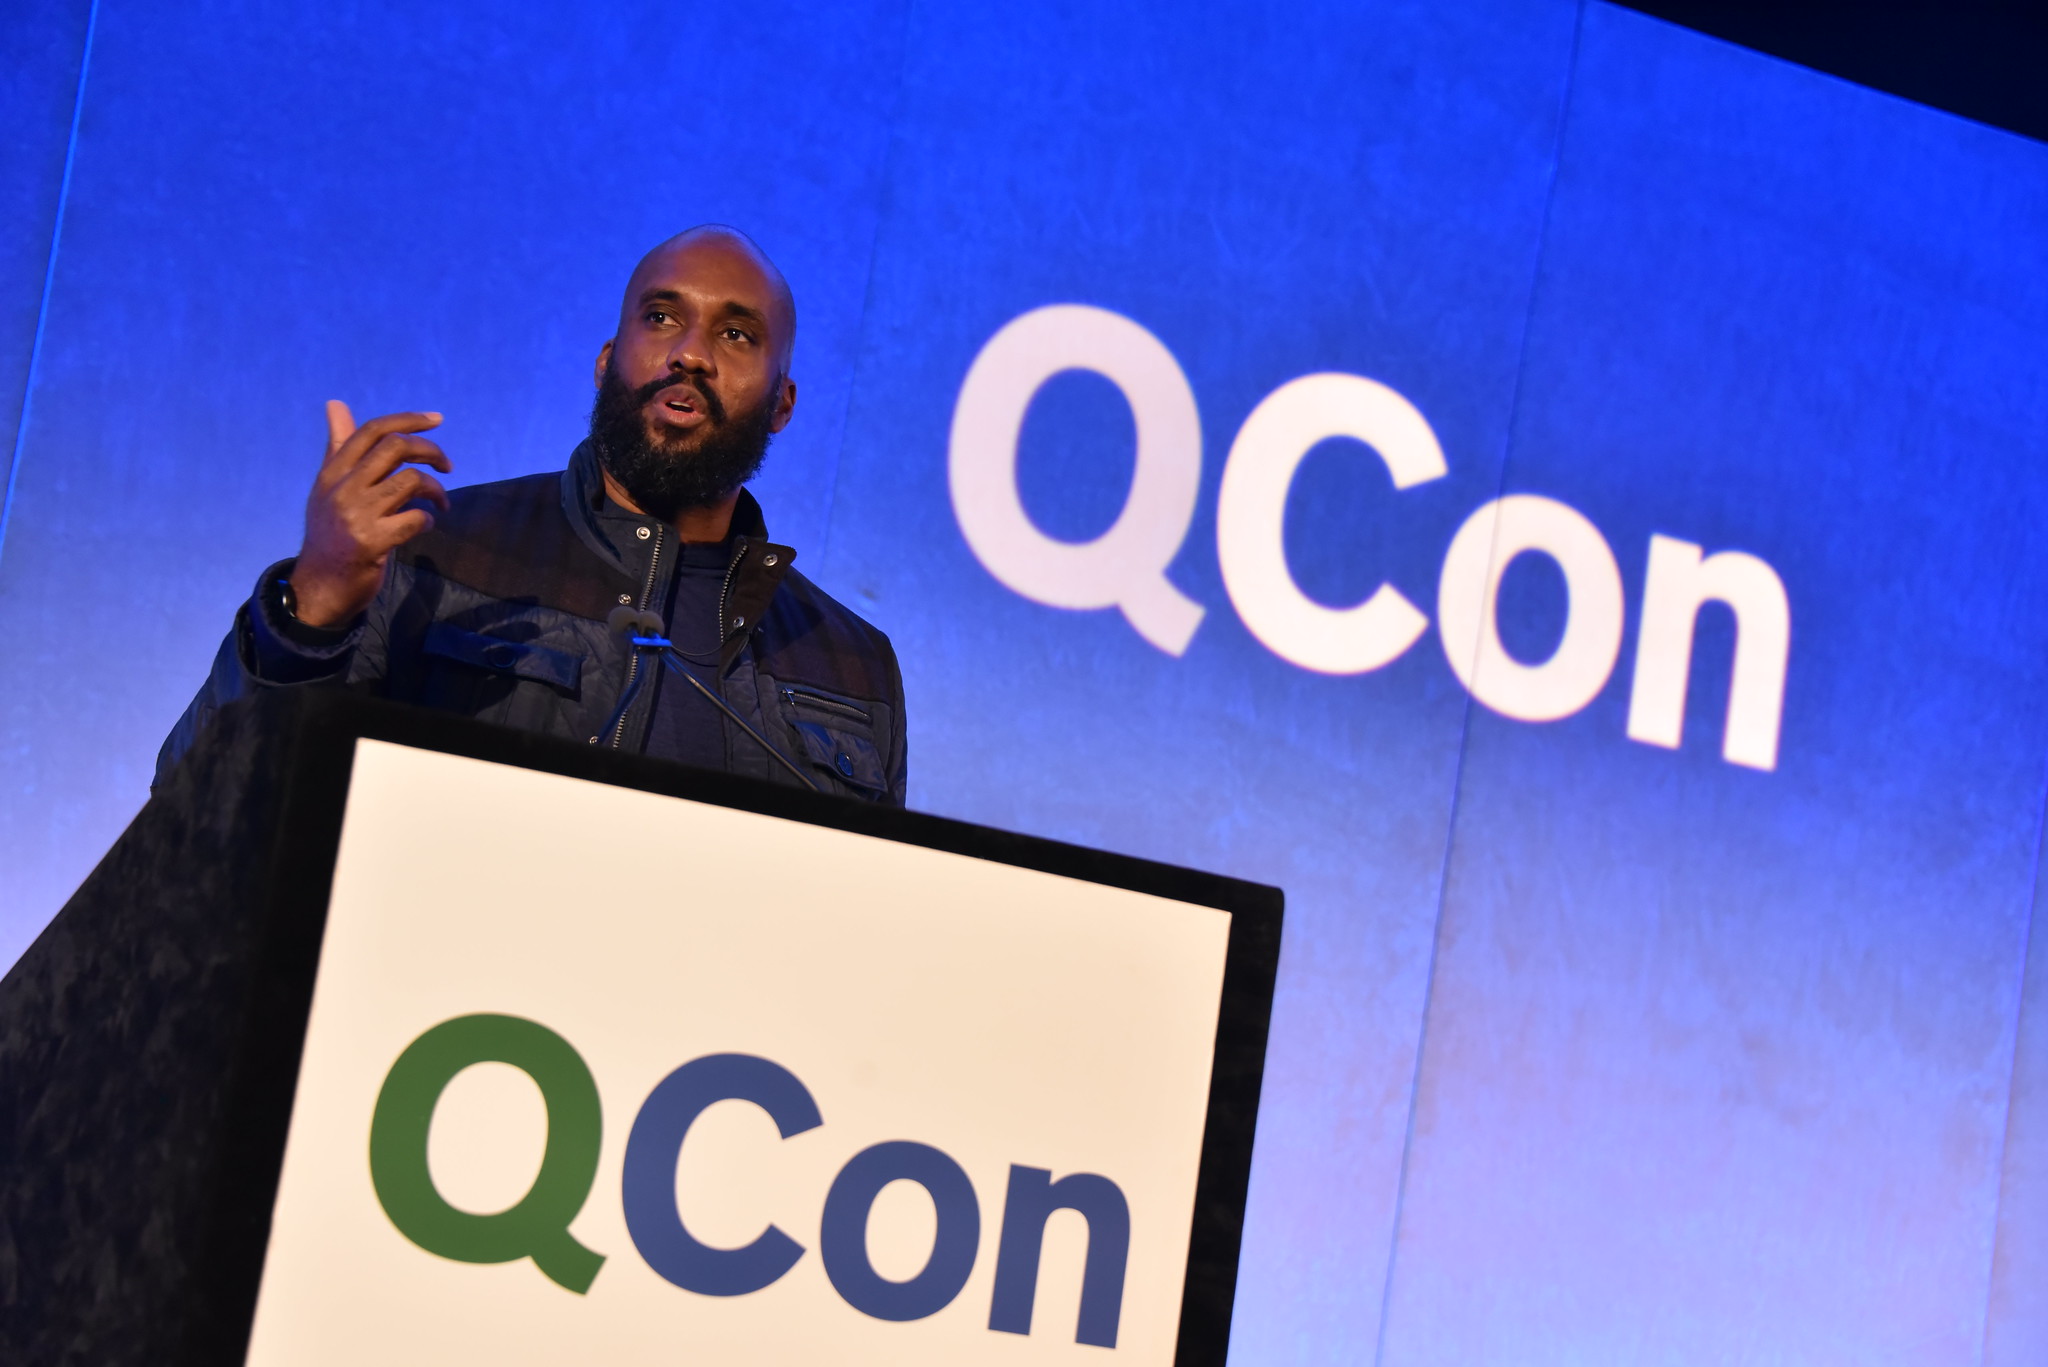 QCon London International Software Development Conference. March 27-29 2023. In-person or online., Westminster, London, United Kingdom